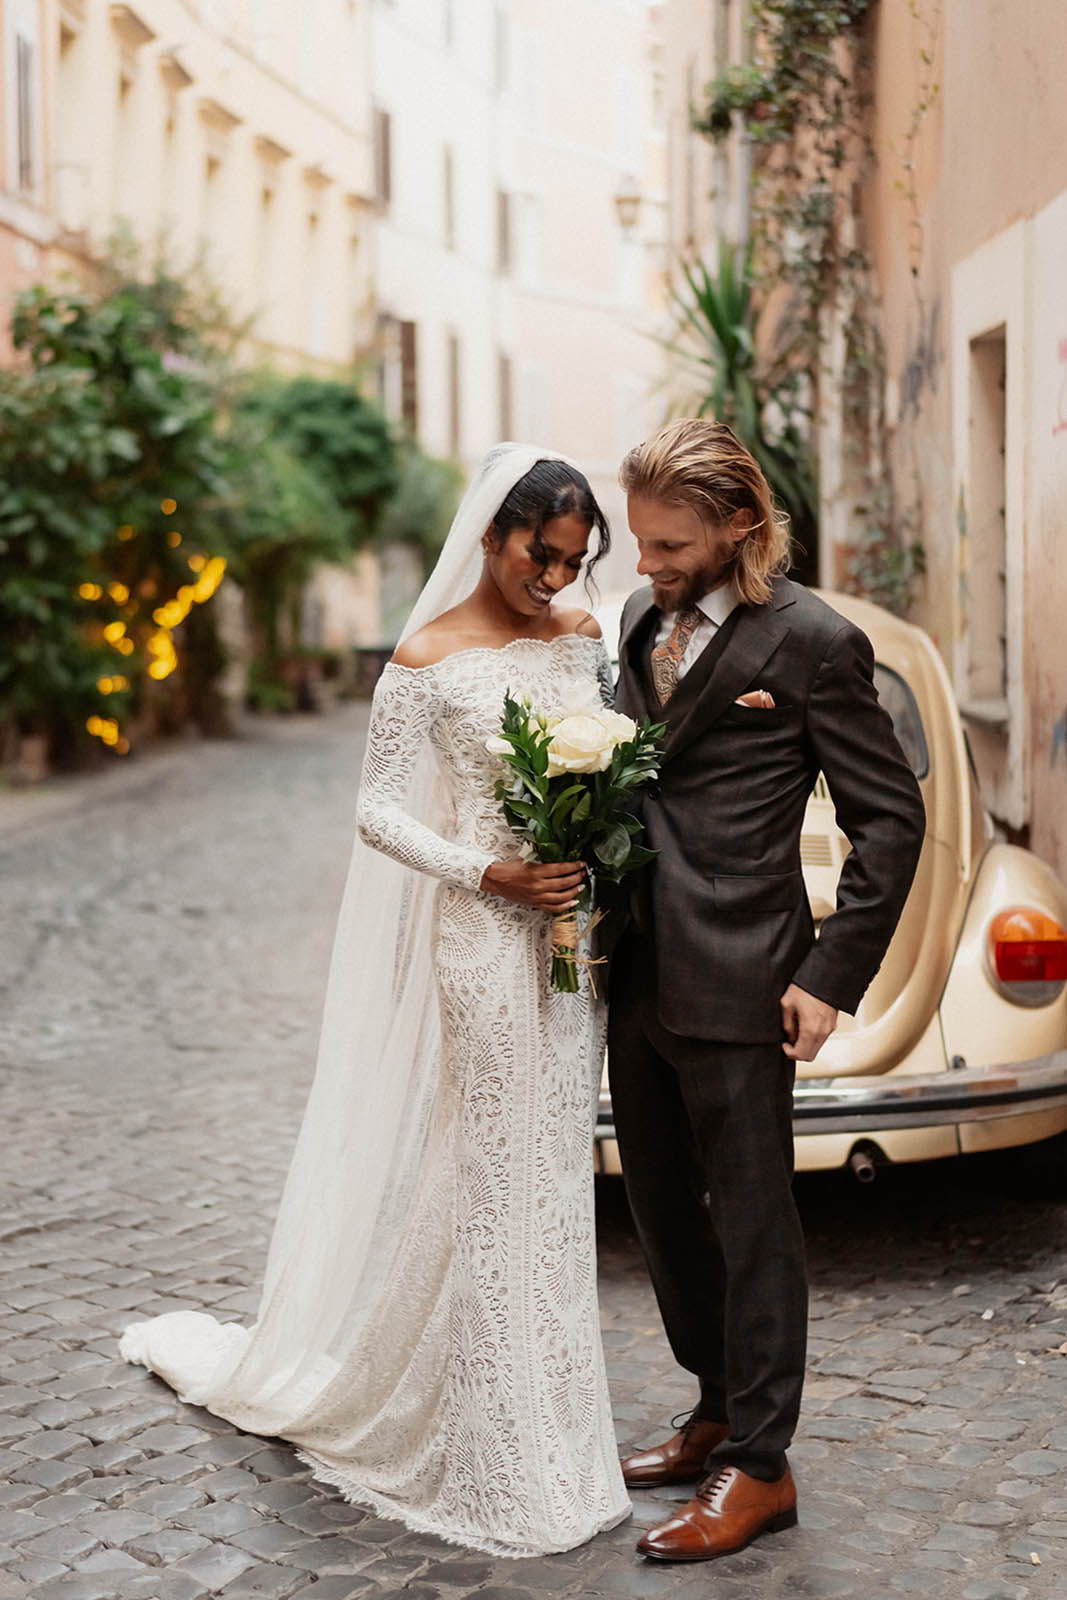 Bride and groom in streets of Rome